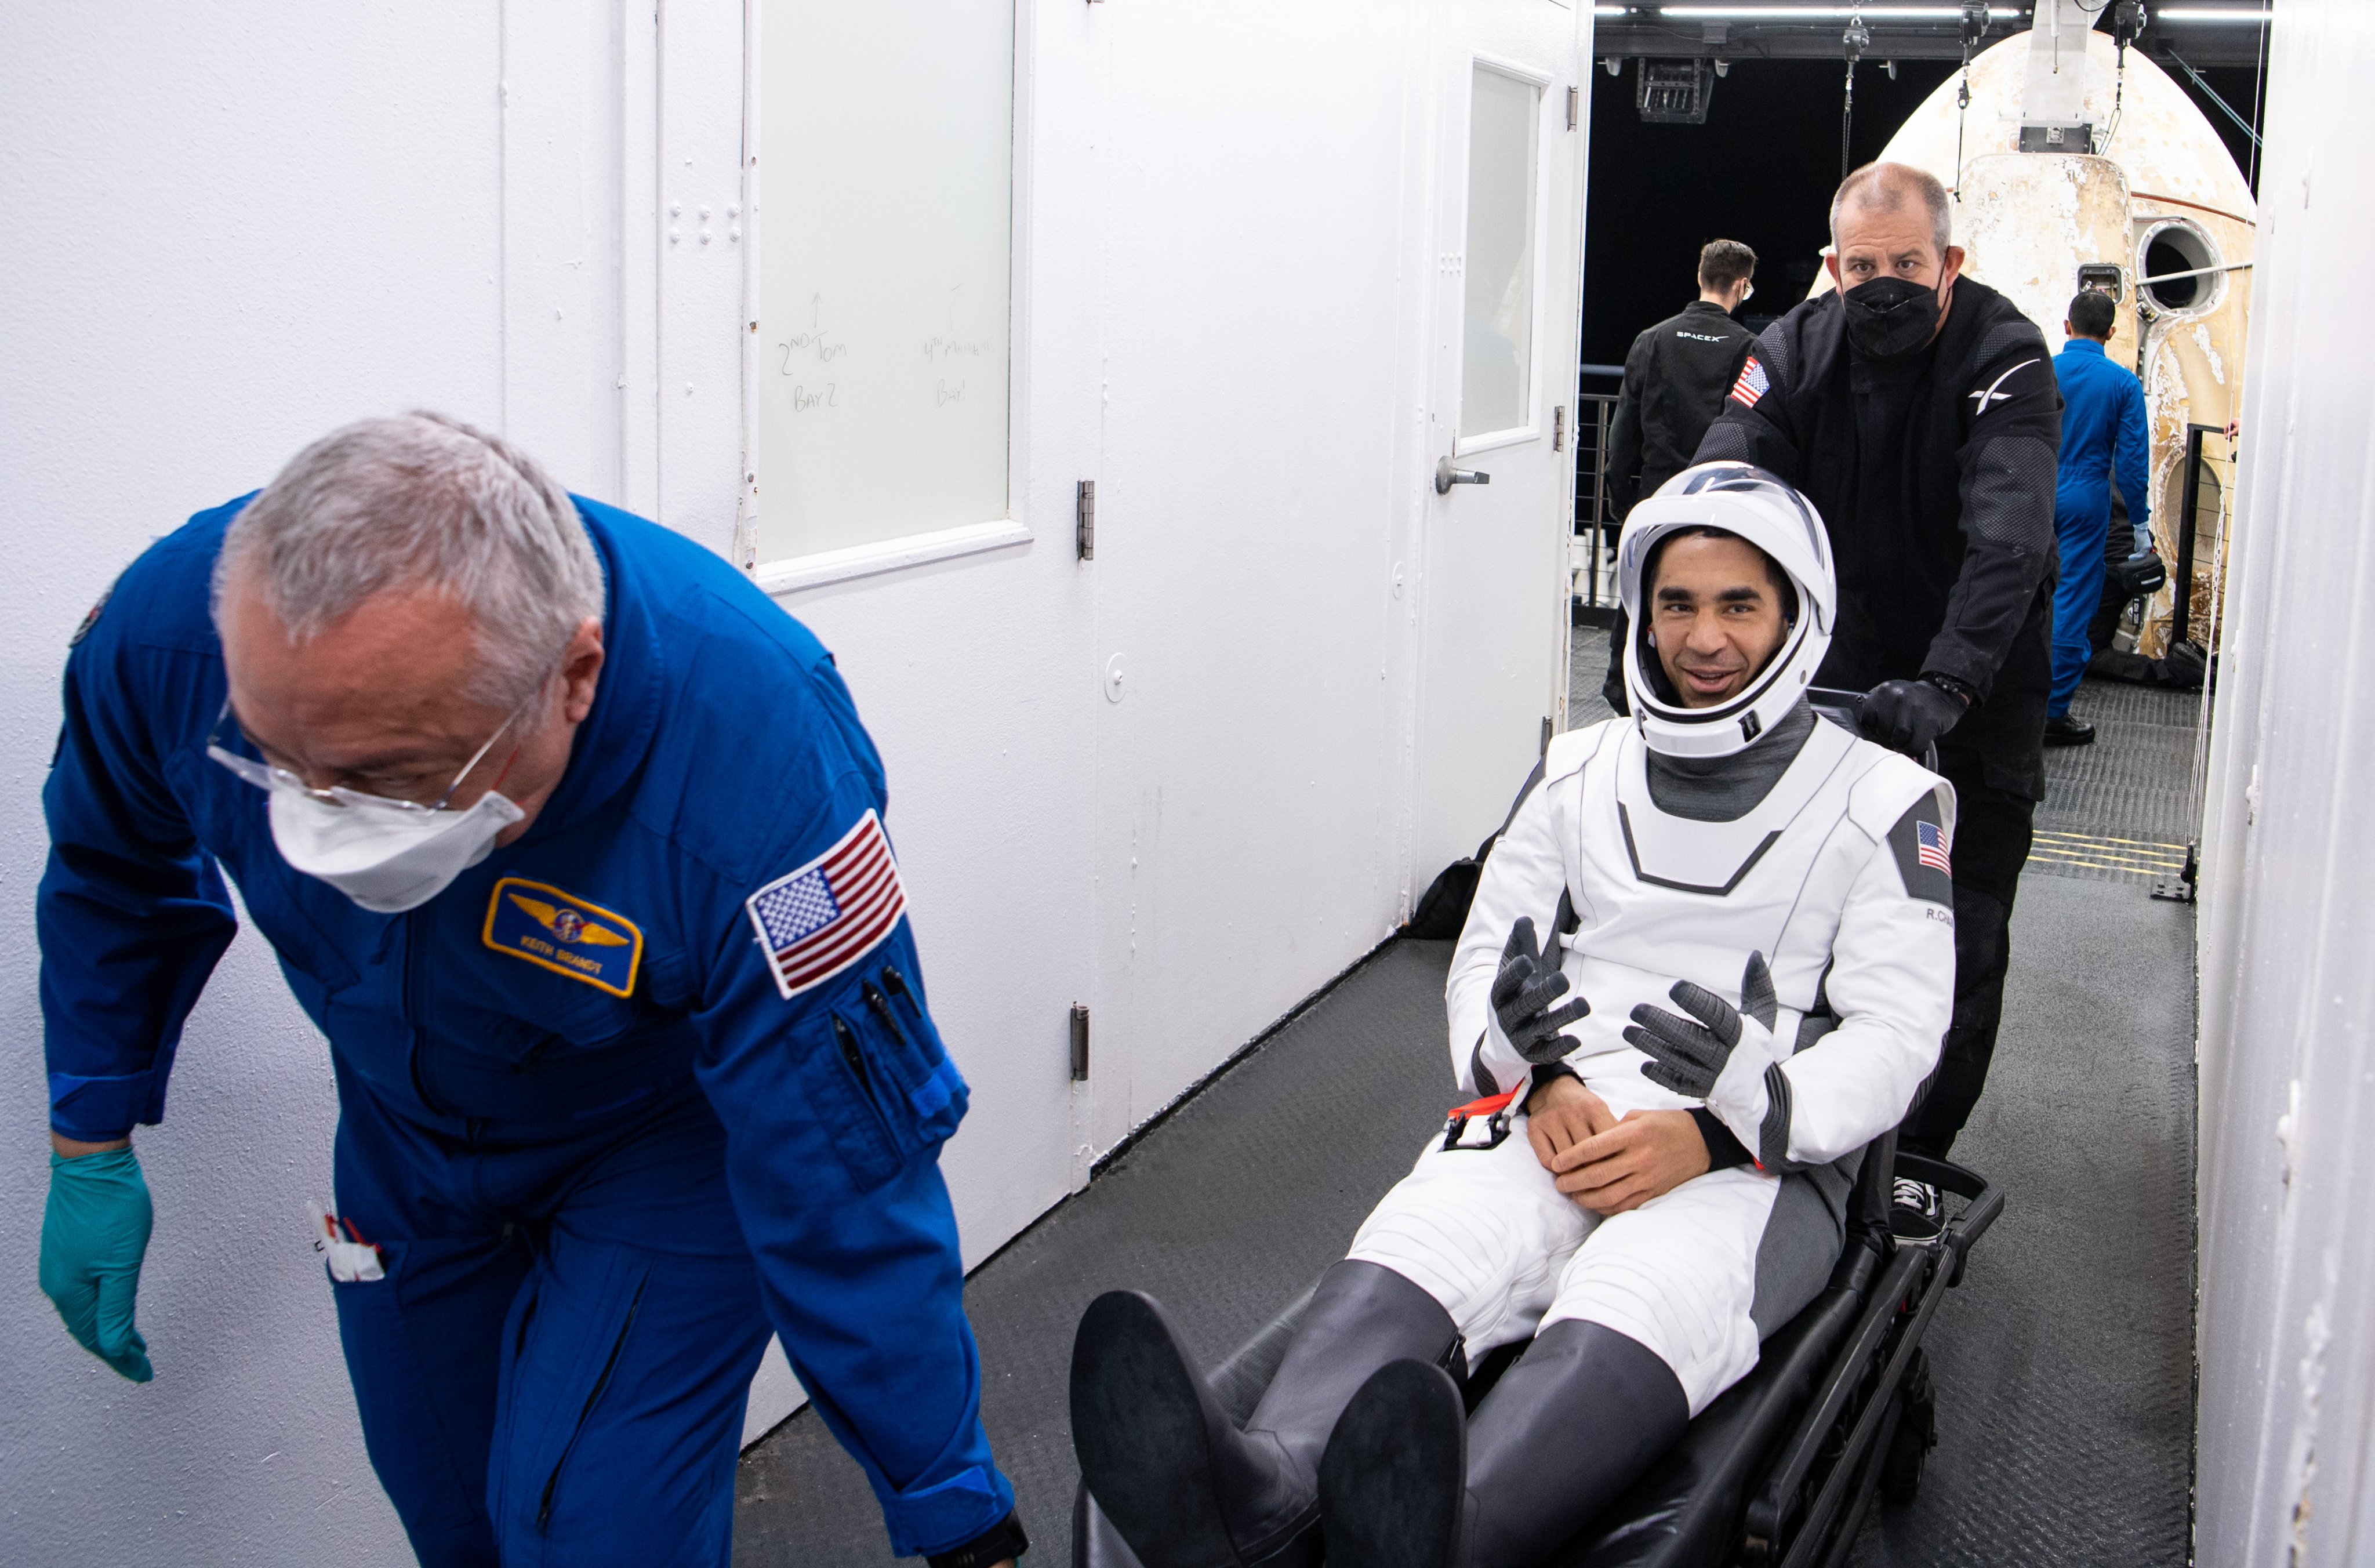 NASA astronaut Raja Chari greets friends after being helped out of the SpaceX Crew Dragon Endurance spacecraft onboard the SpaceX Shannon recovery ship.